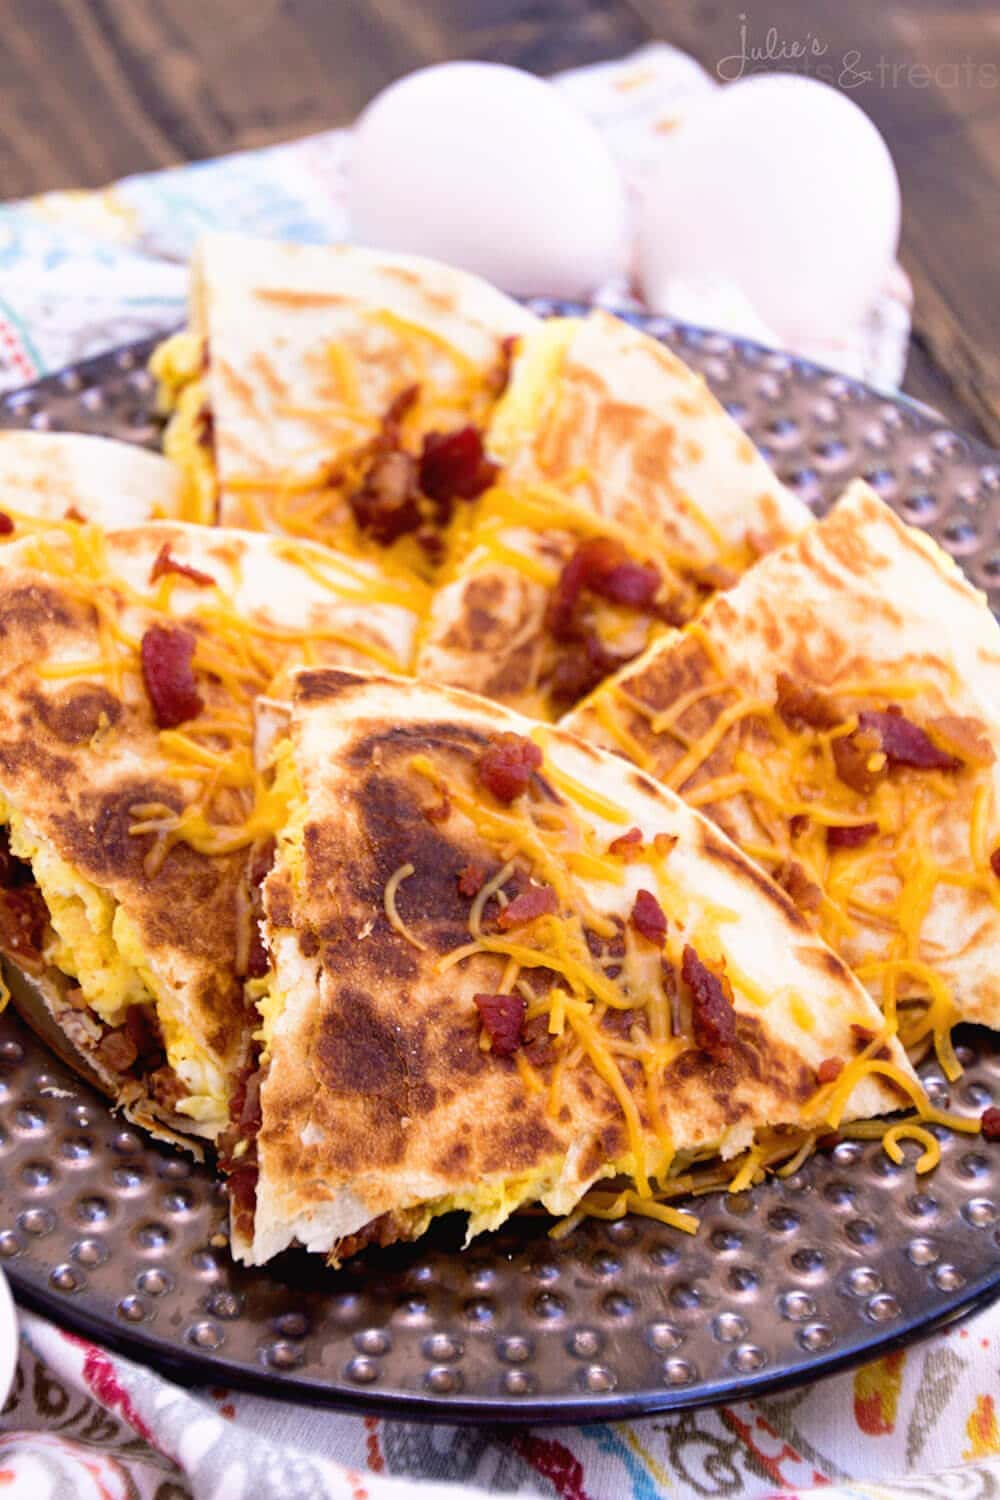 Bacon, Egg & Cheese Quesadillas Recipe ~ Crispy, Pan Fried Tortillas Stuffed with Bacon, Egg & Cheese! Makes the Perfect Quick, Easy Breakfast Recipe!